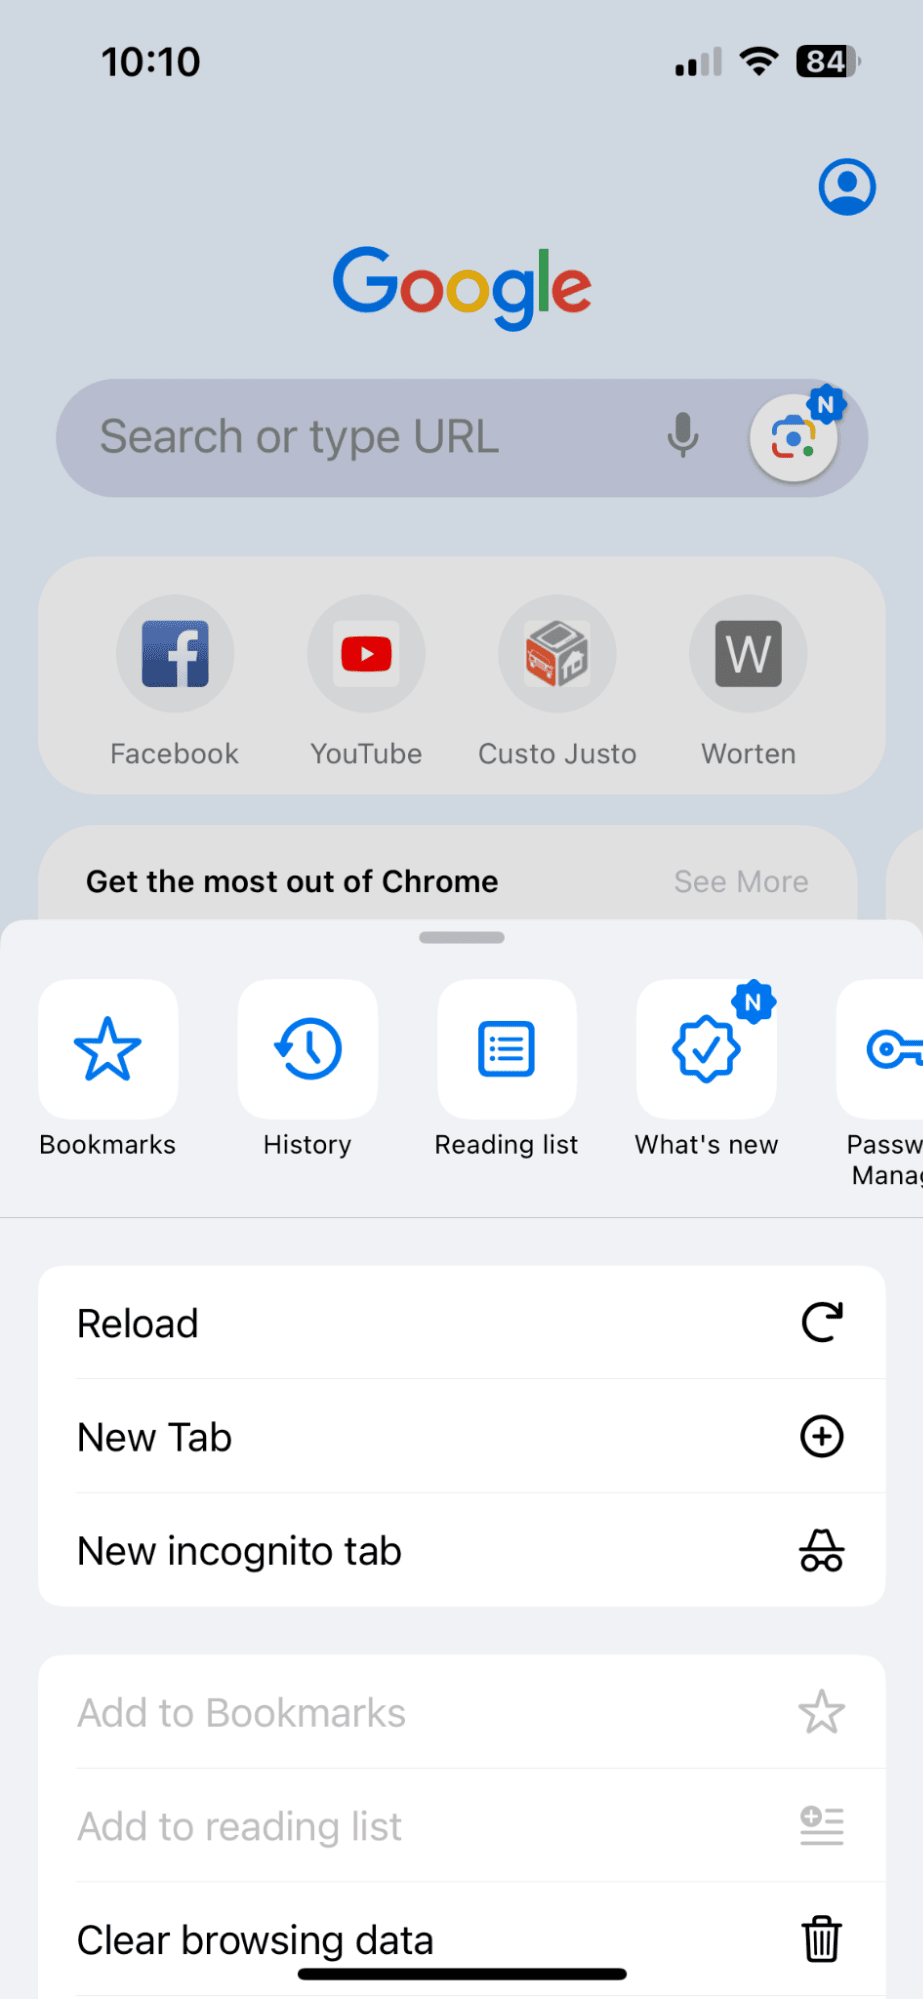 How to clear Chrome browsing history